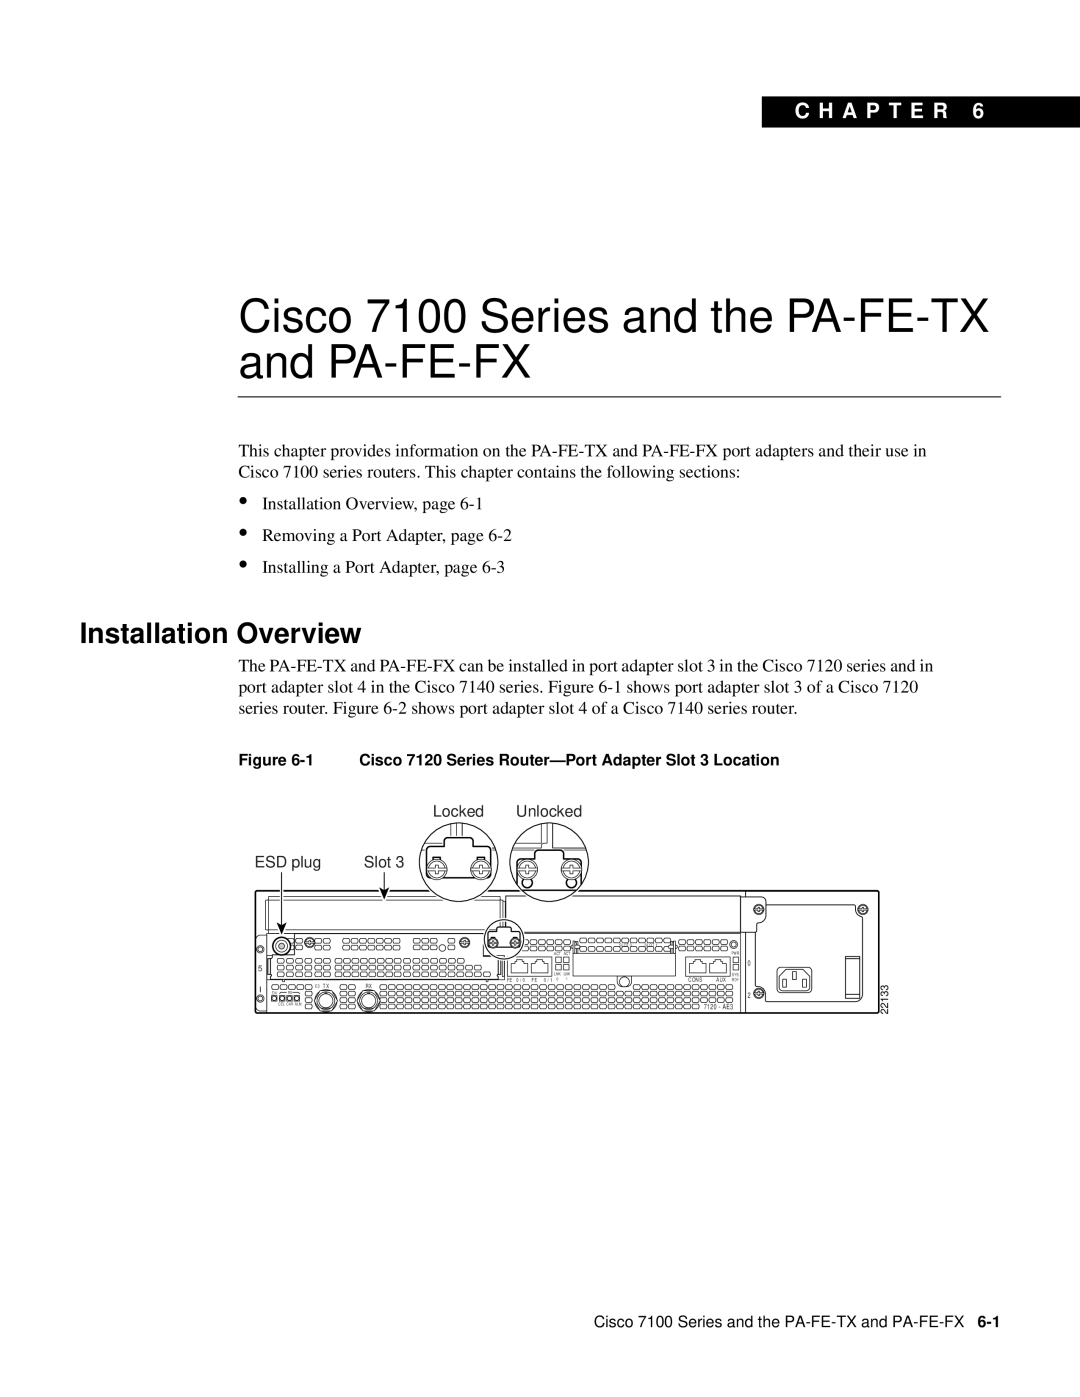 Cisco Systems manual Cisco 7100 Series and the PA-FE-TX and PA-FE-FX, Installation Overview, C H A P T E R 